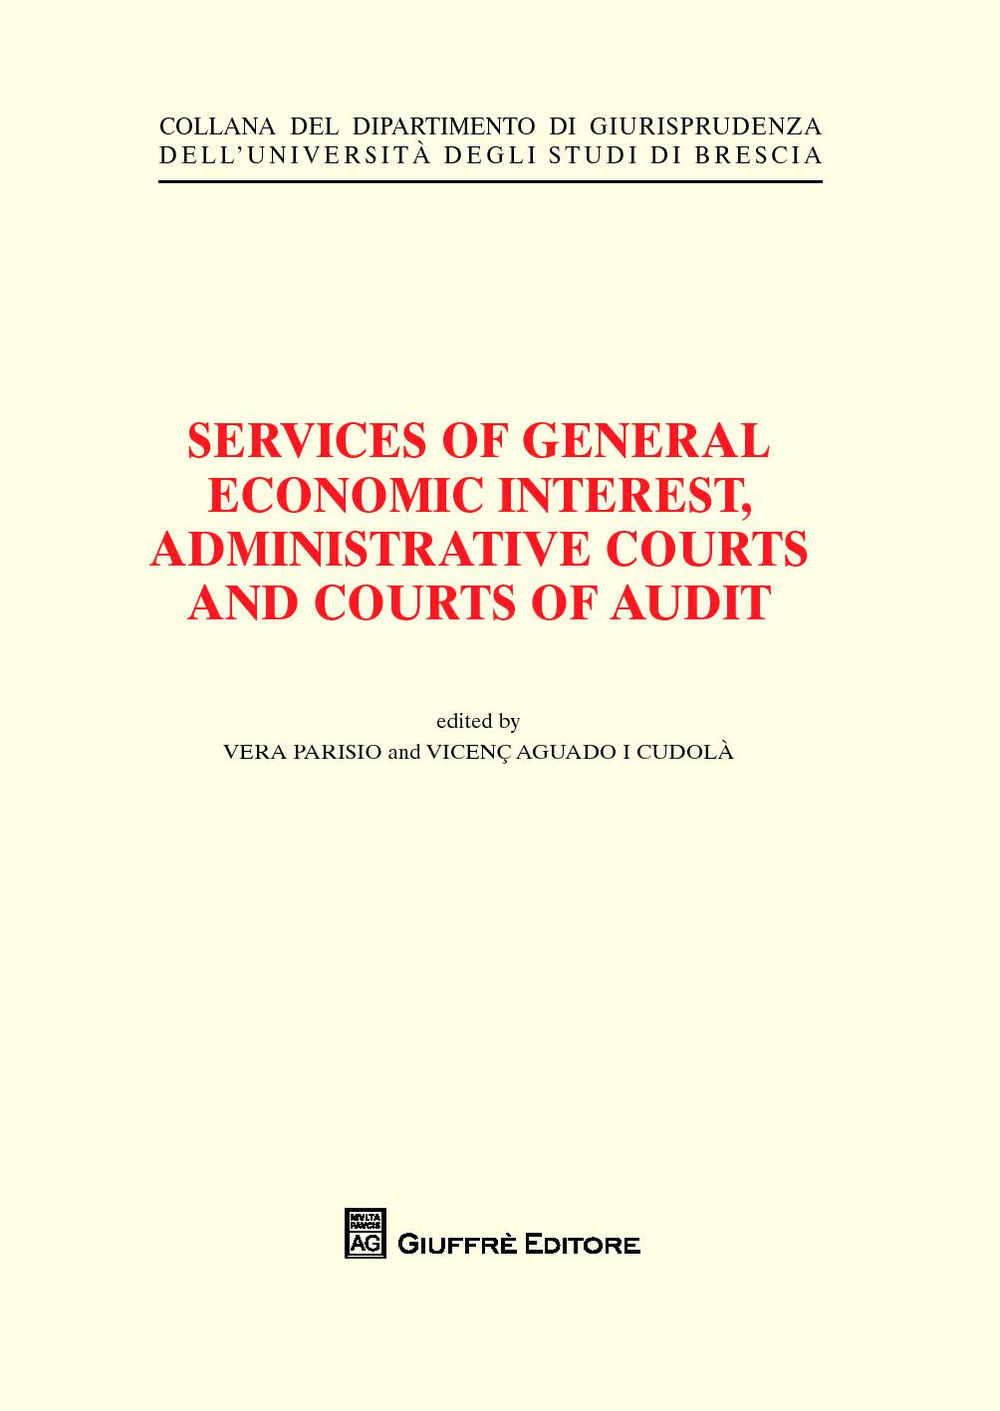 Services of general economic interest, administrative courts and courts of audit